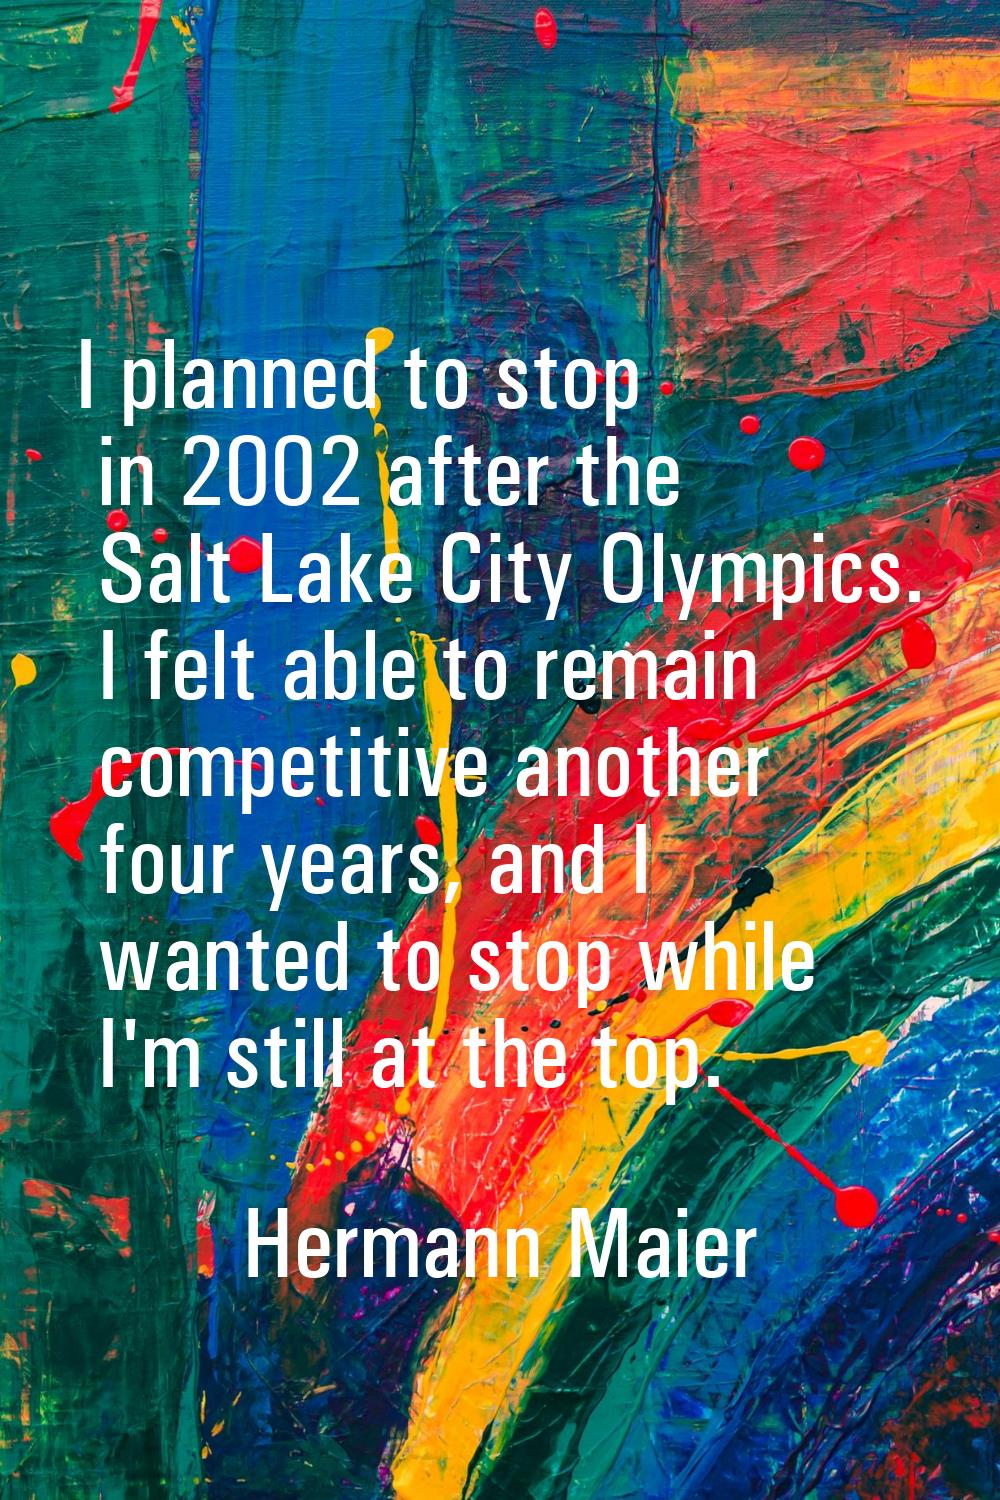 I planned to stop in 2002 after the Salt Lake City Olympics. I felt able to remain competitive anot